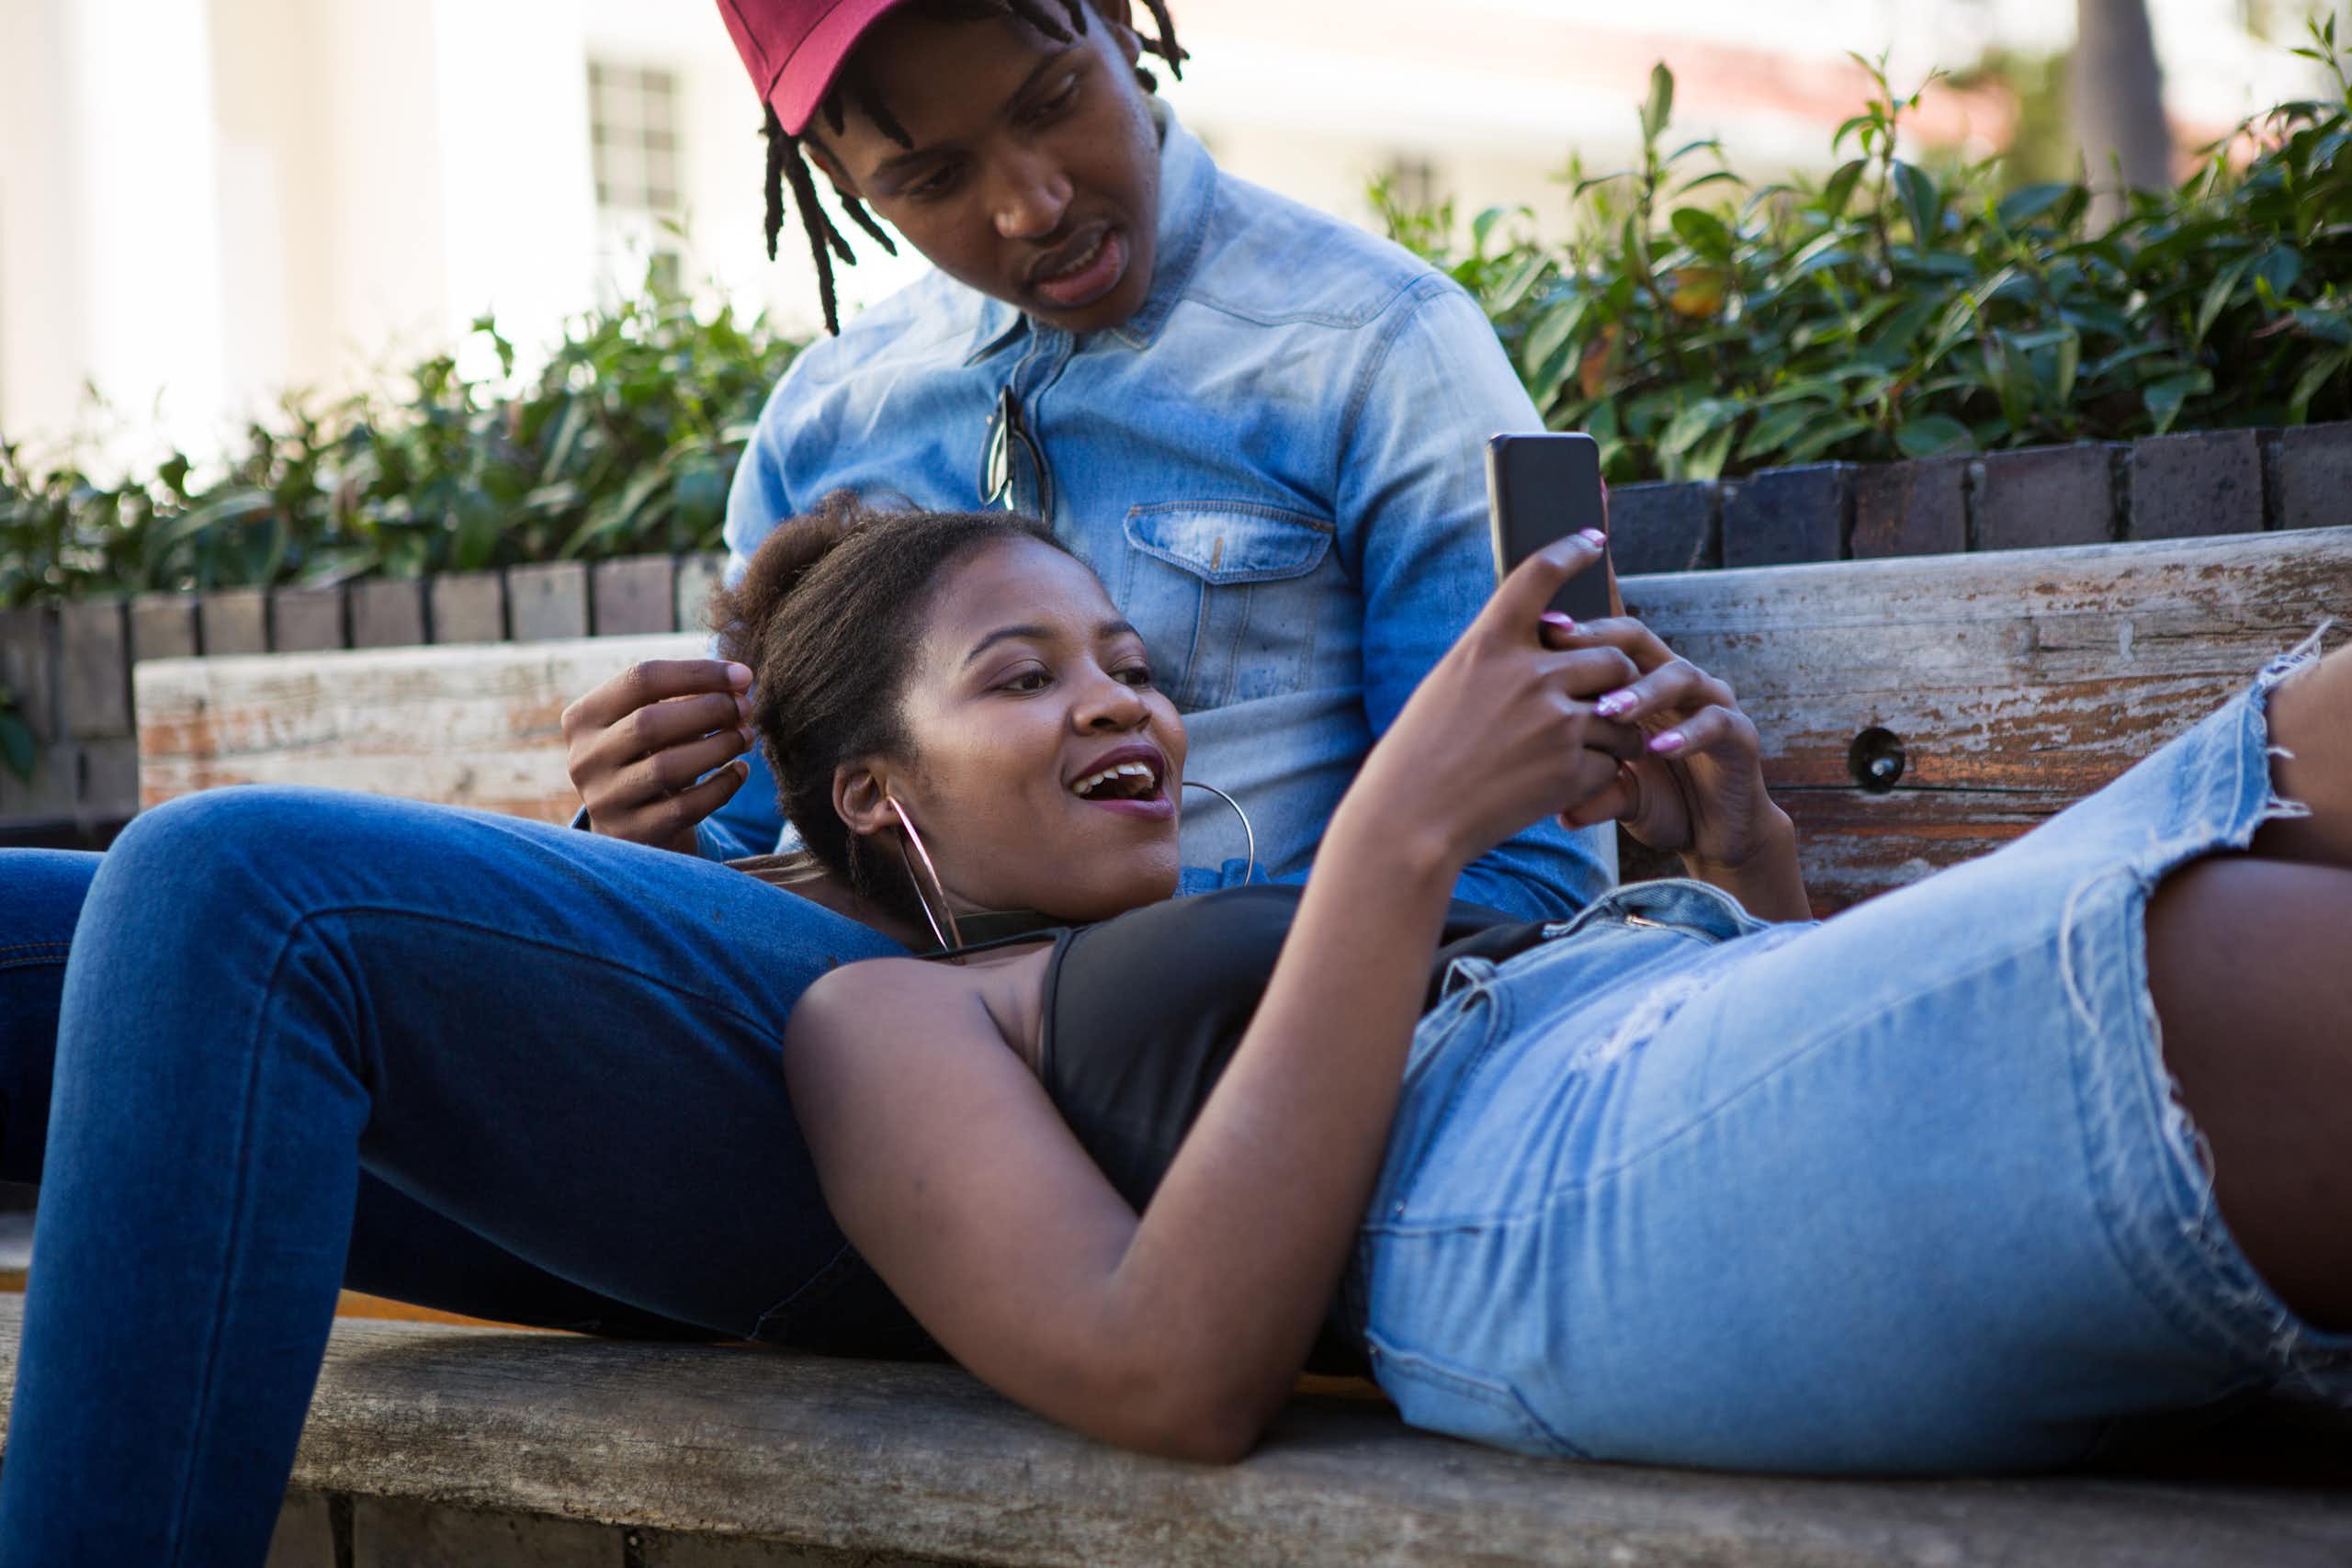 Social media for sex education: South African teens explain how it would help them